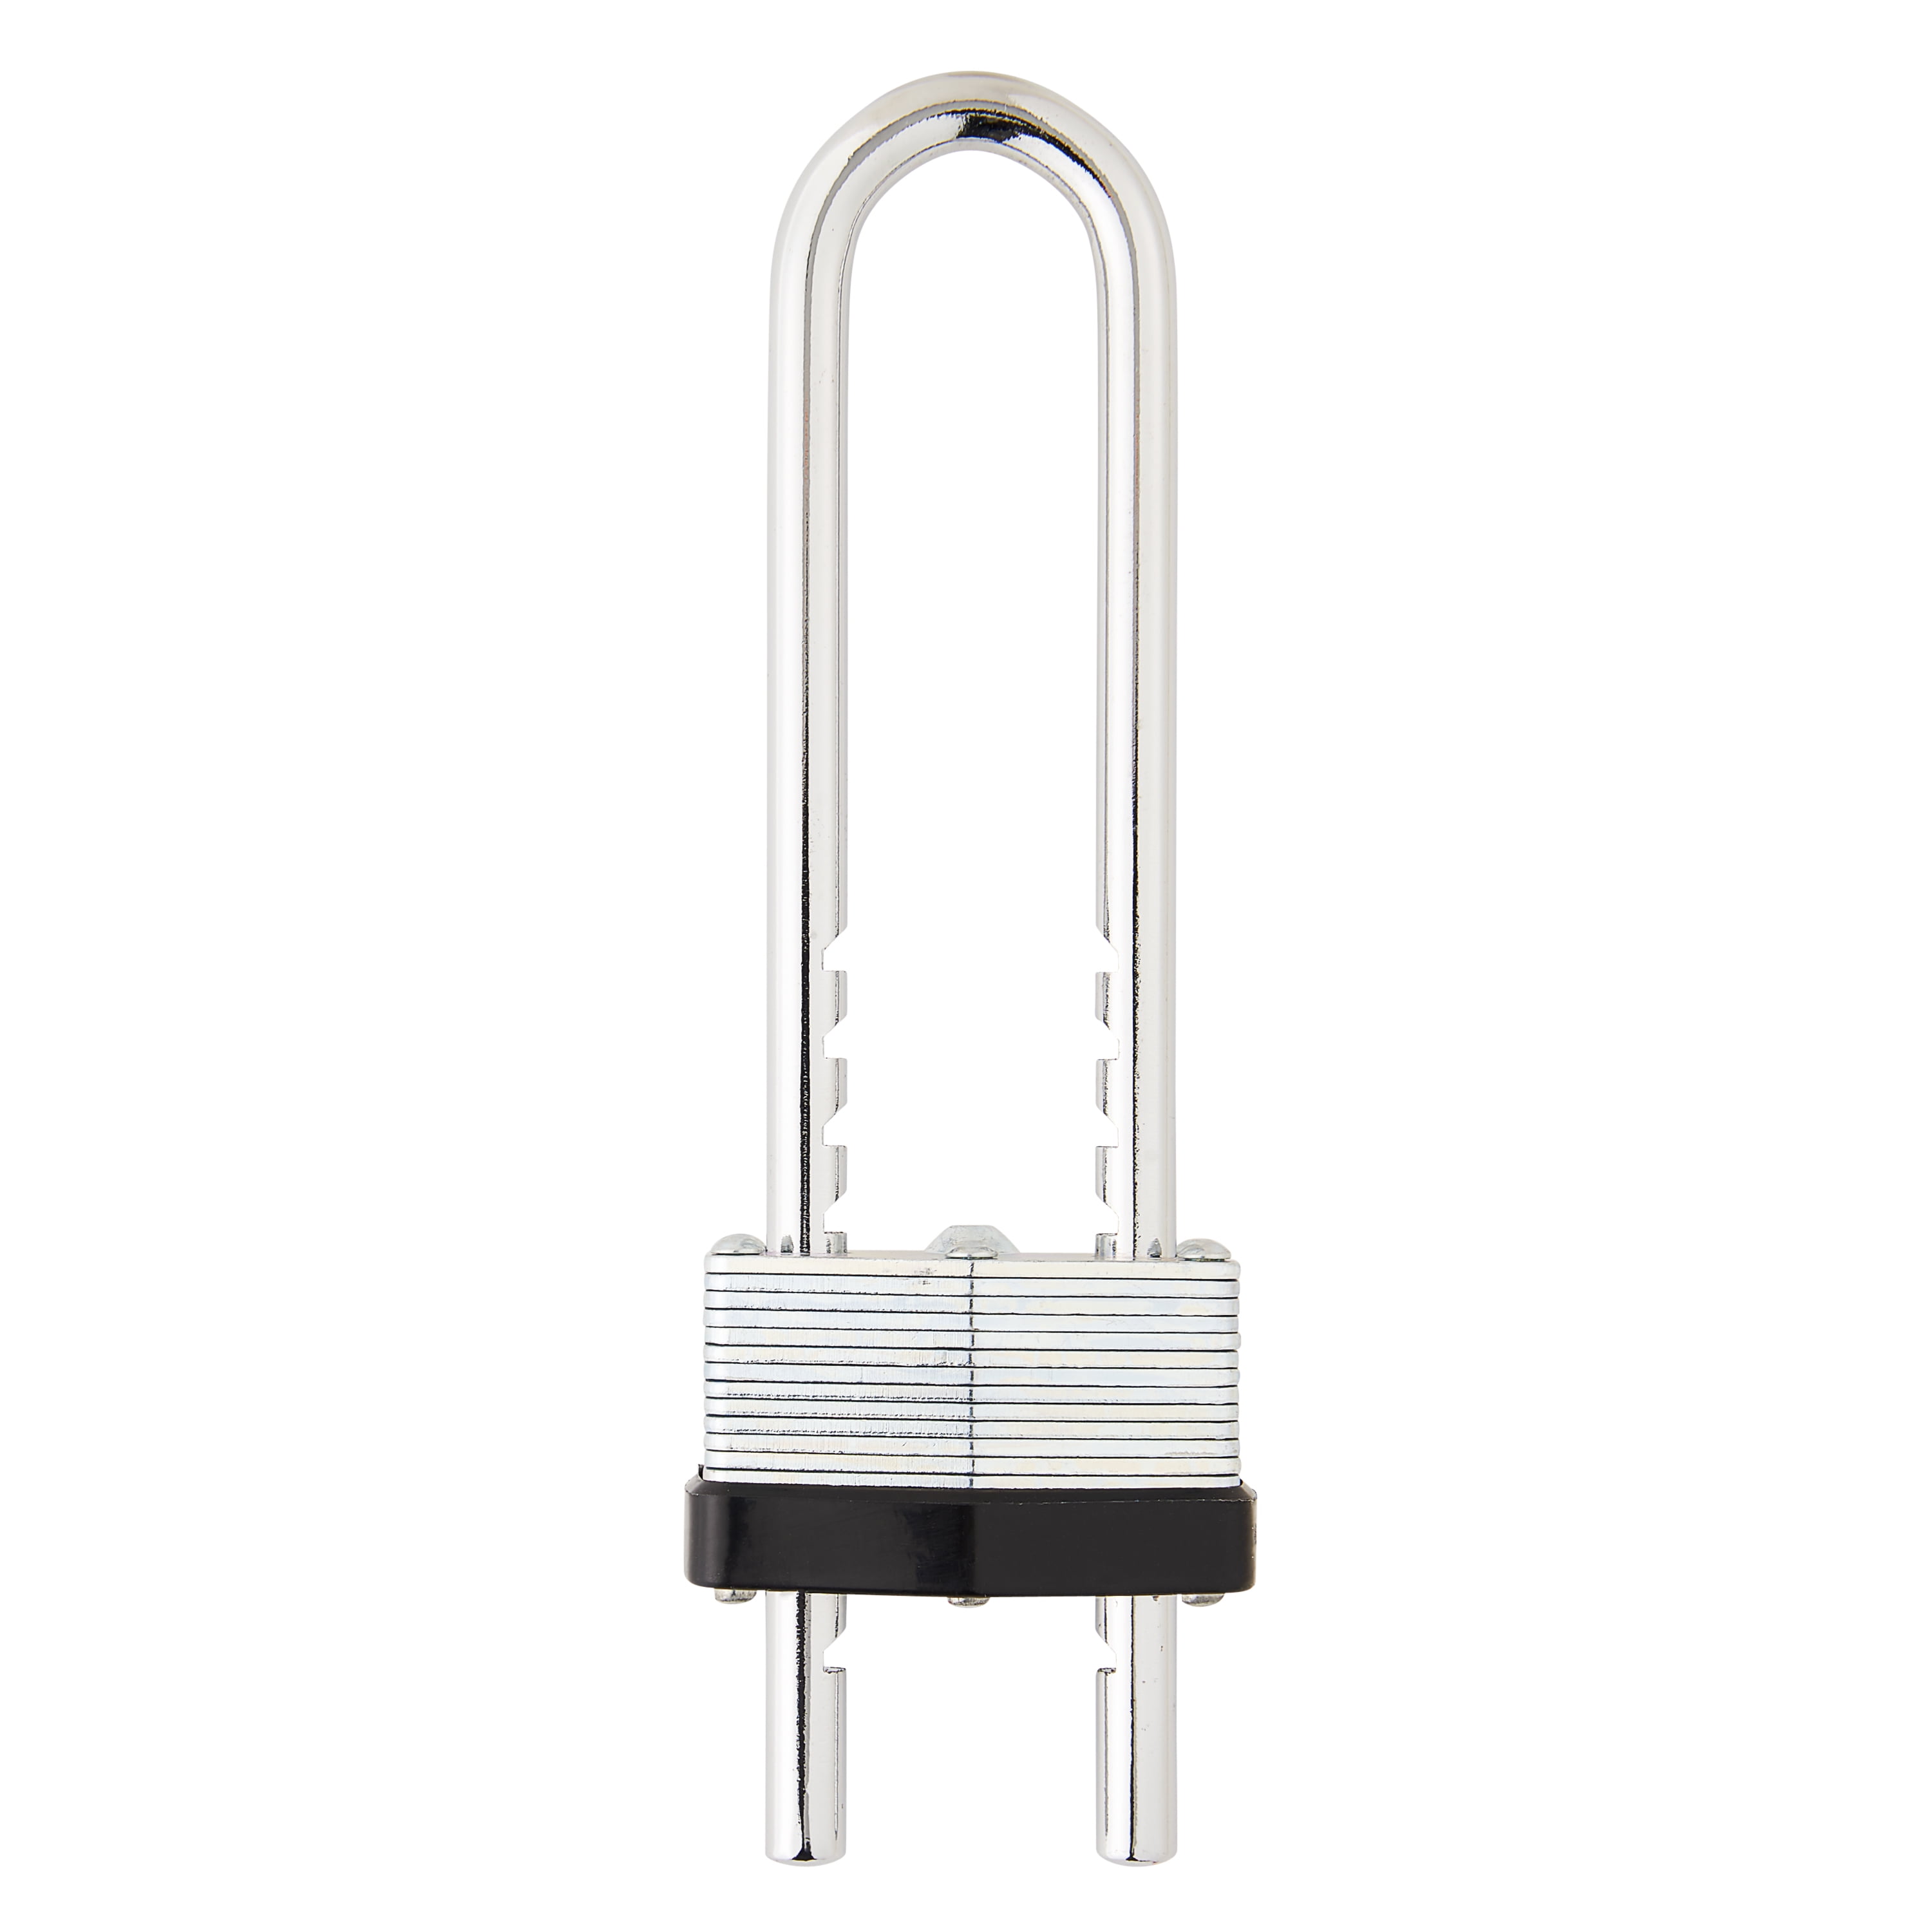 Hyper Tough 44mm Laminated Steel Padlock with Adjustable Shackle